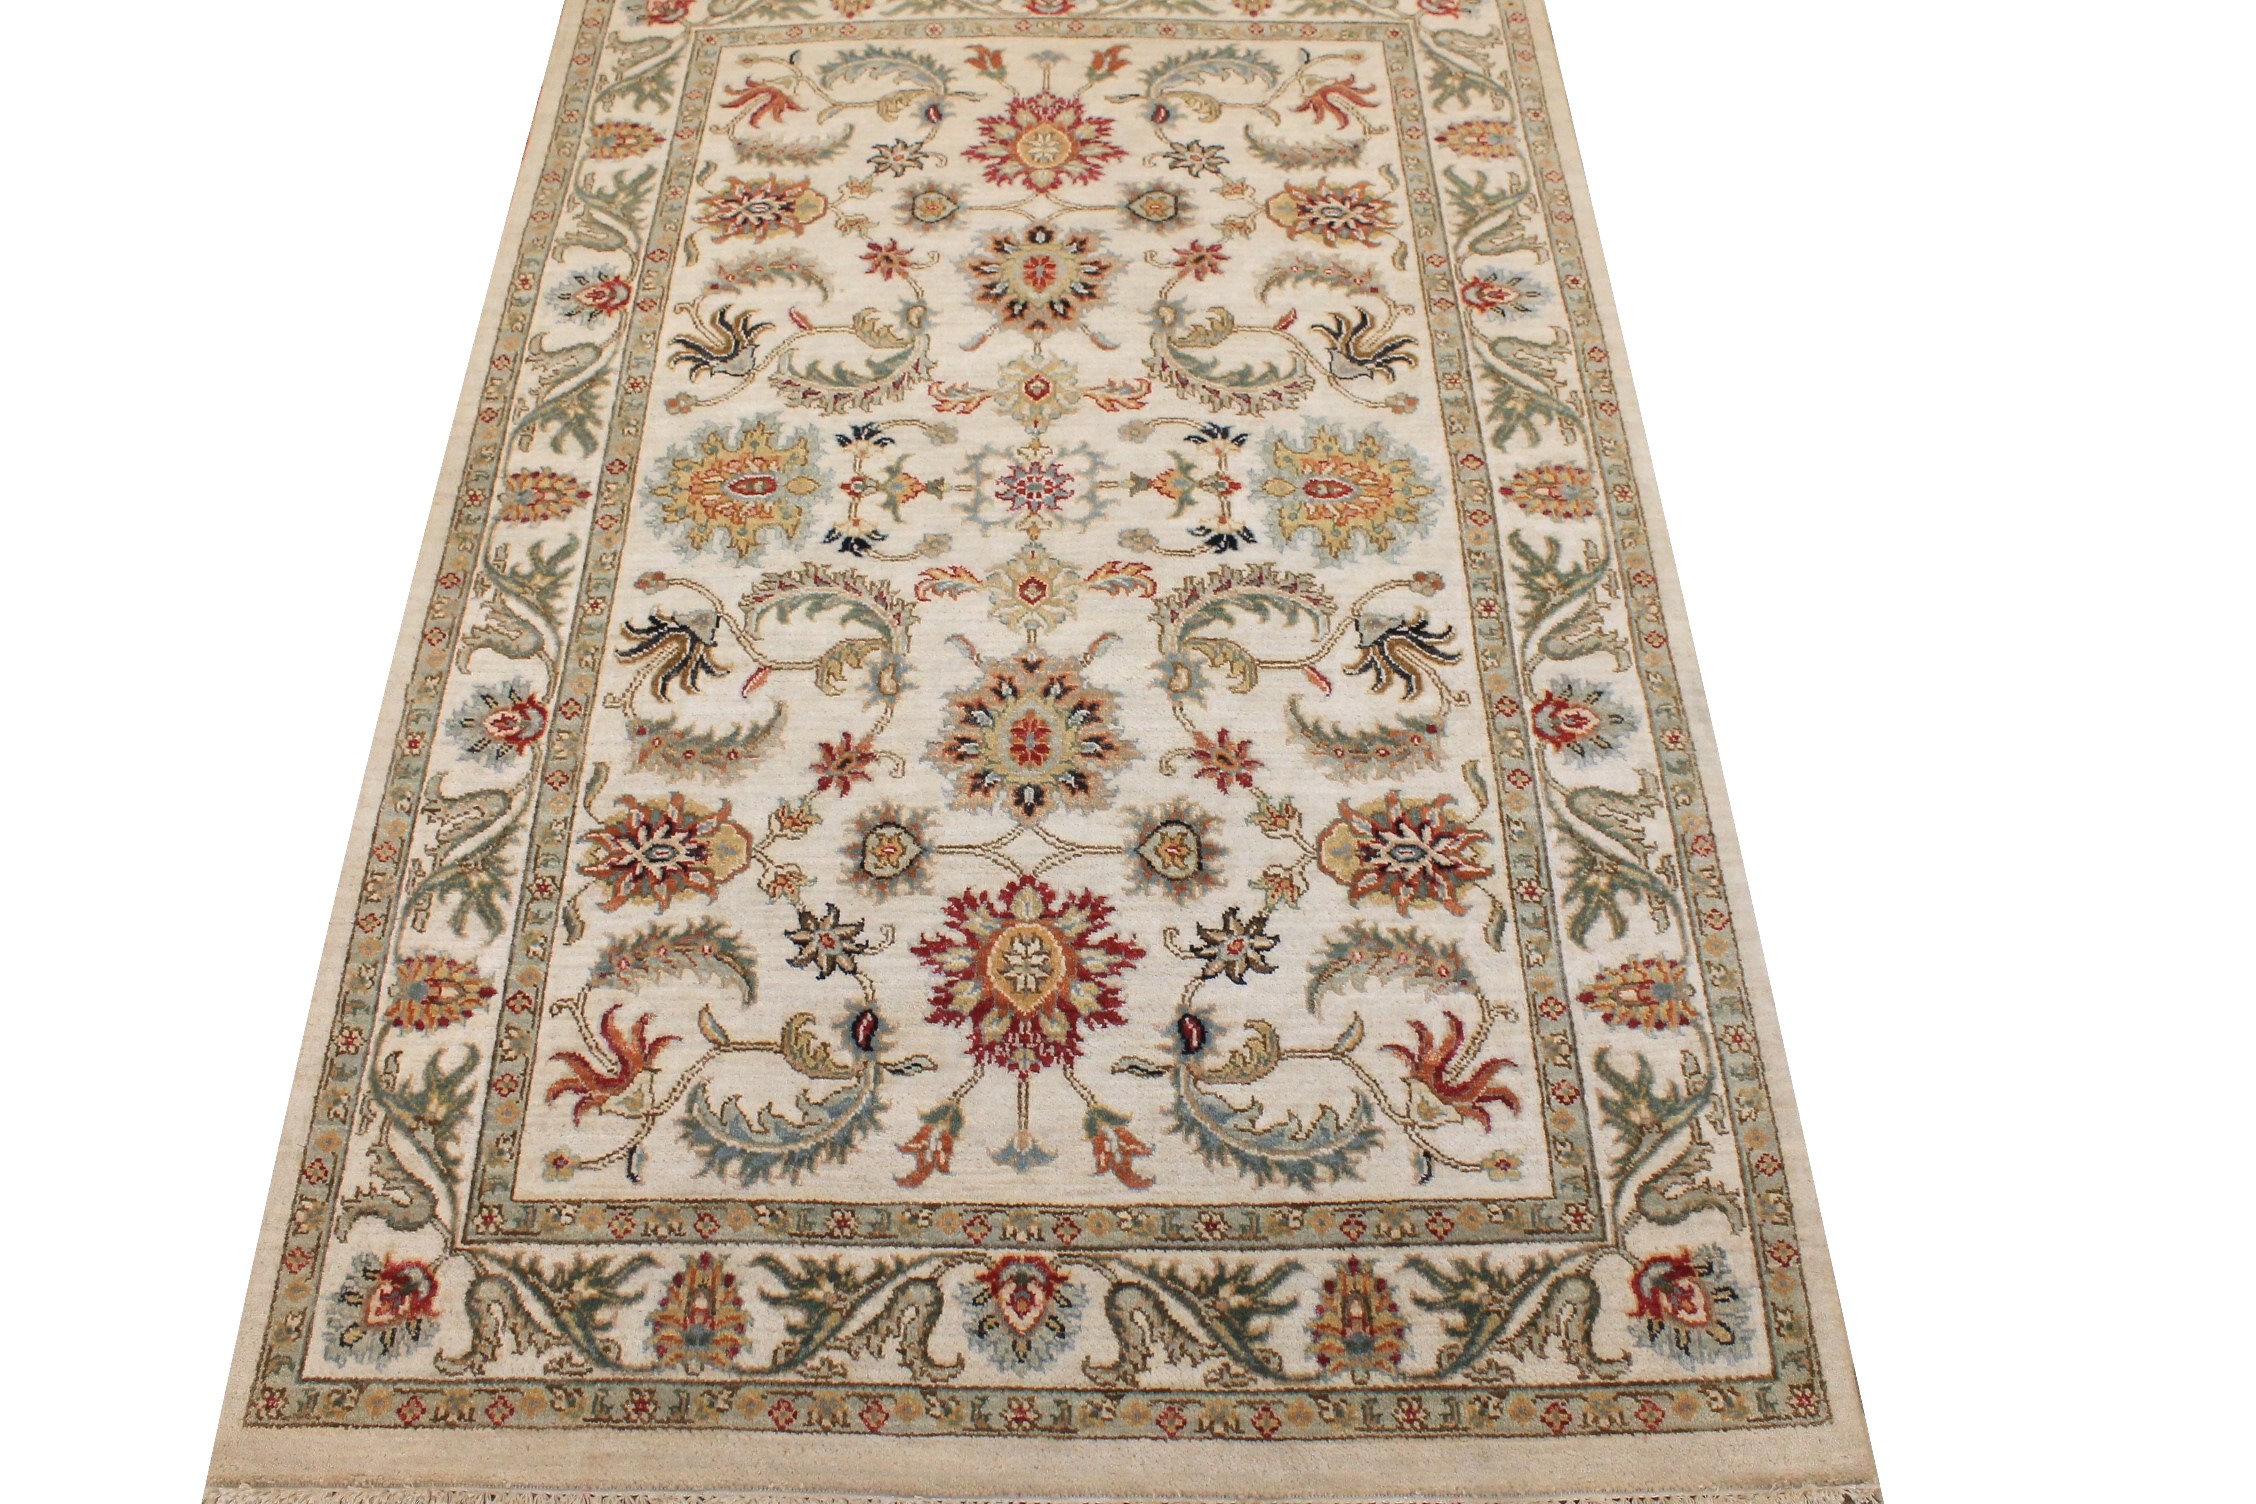 4x6 Traditional Hand Knotted Wool Area Rug - MR026902